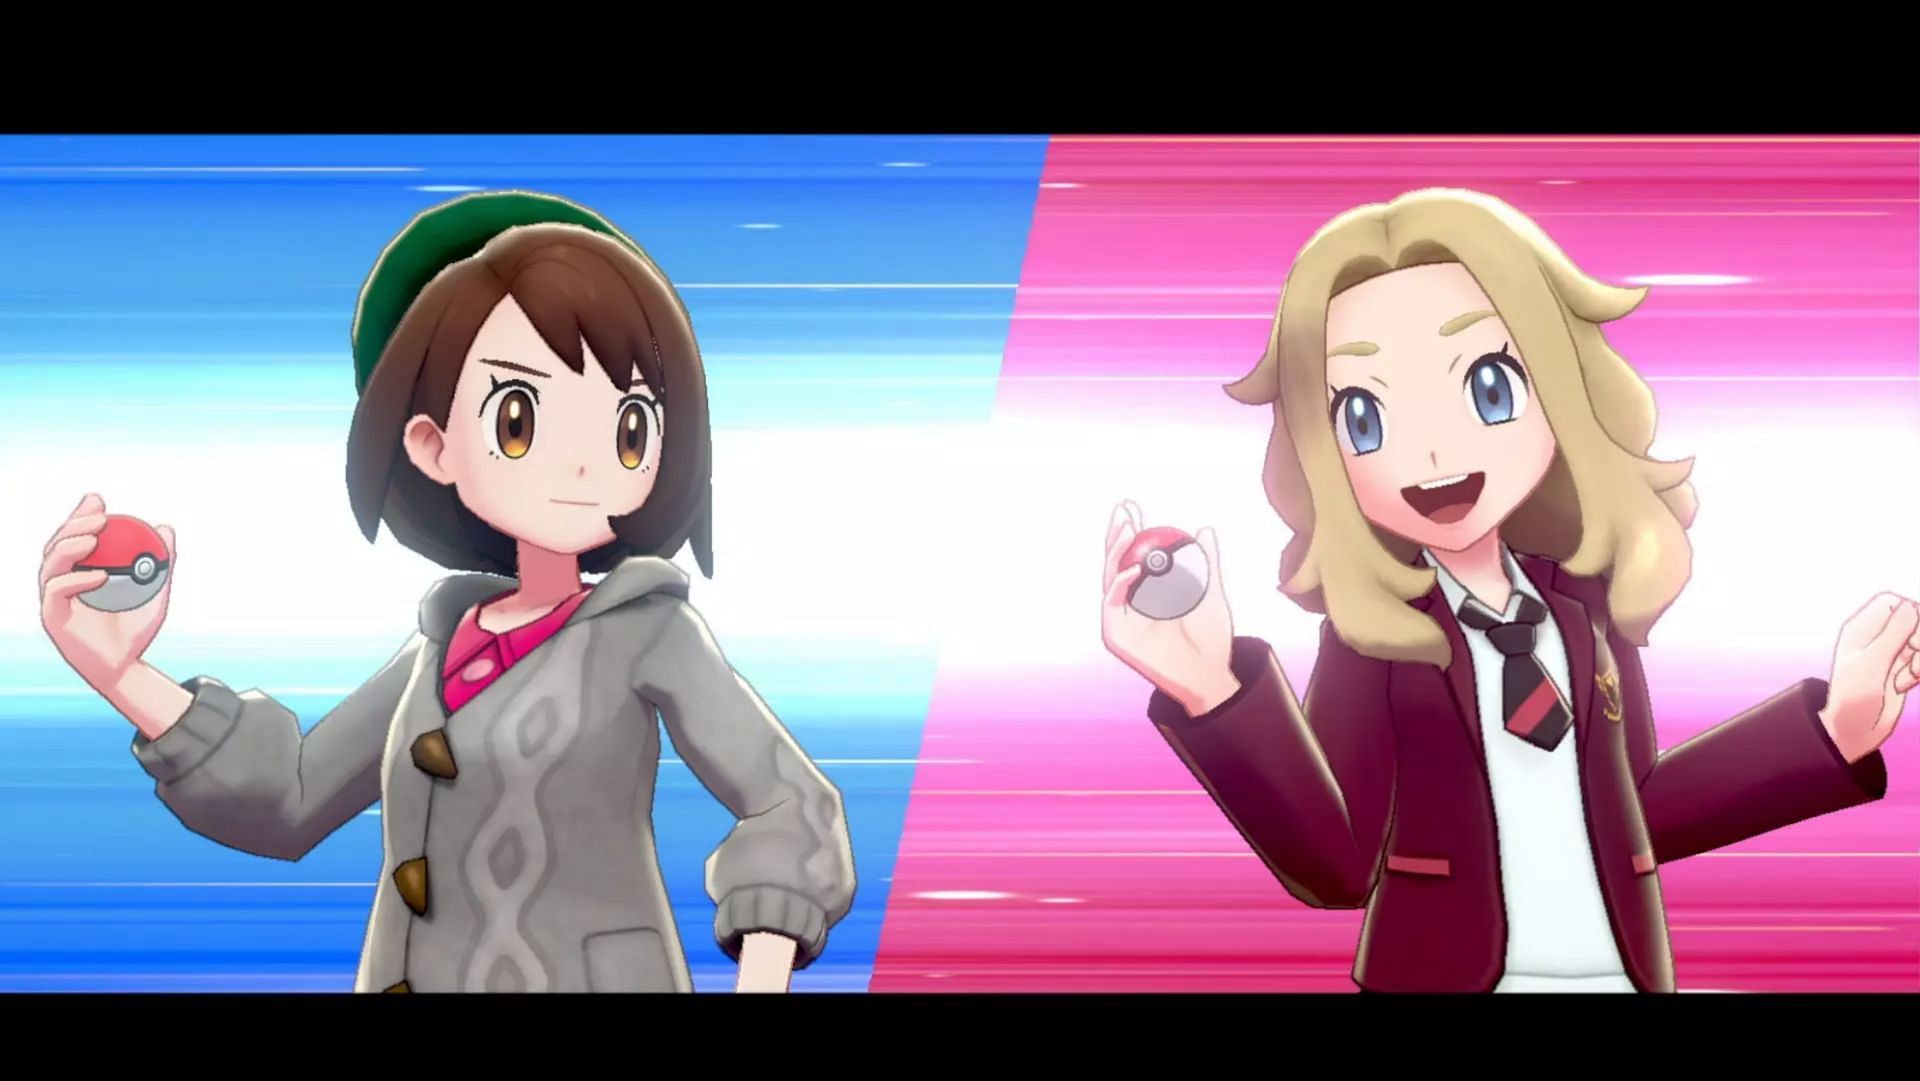 Sad news for Pokemon Sword and Shield fans, support for the game is ending soon (Image via Nintendo)